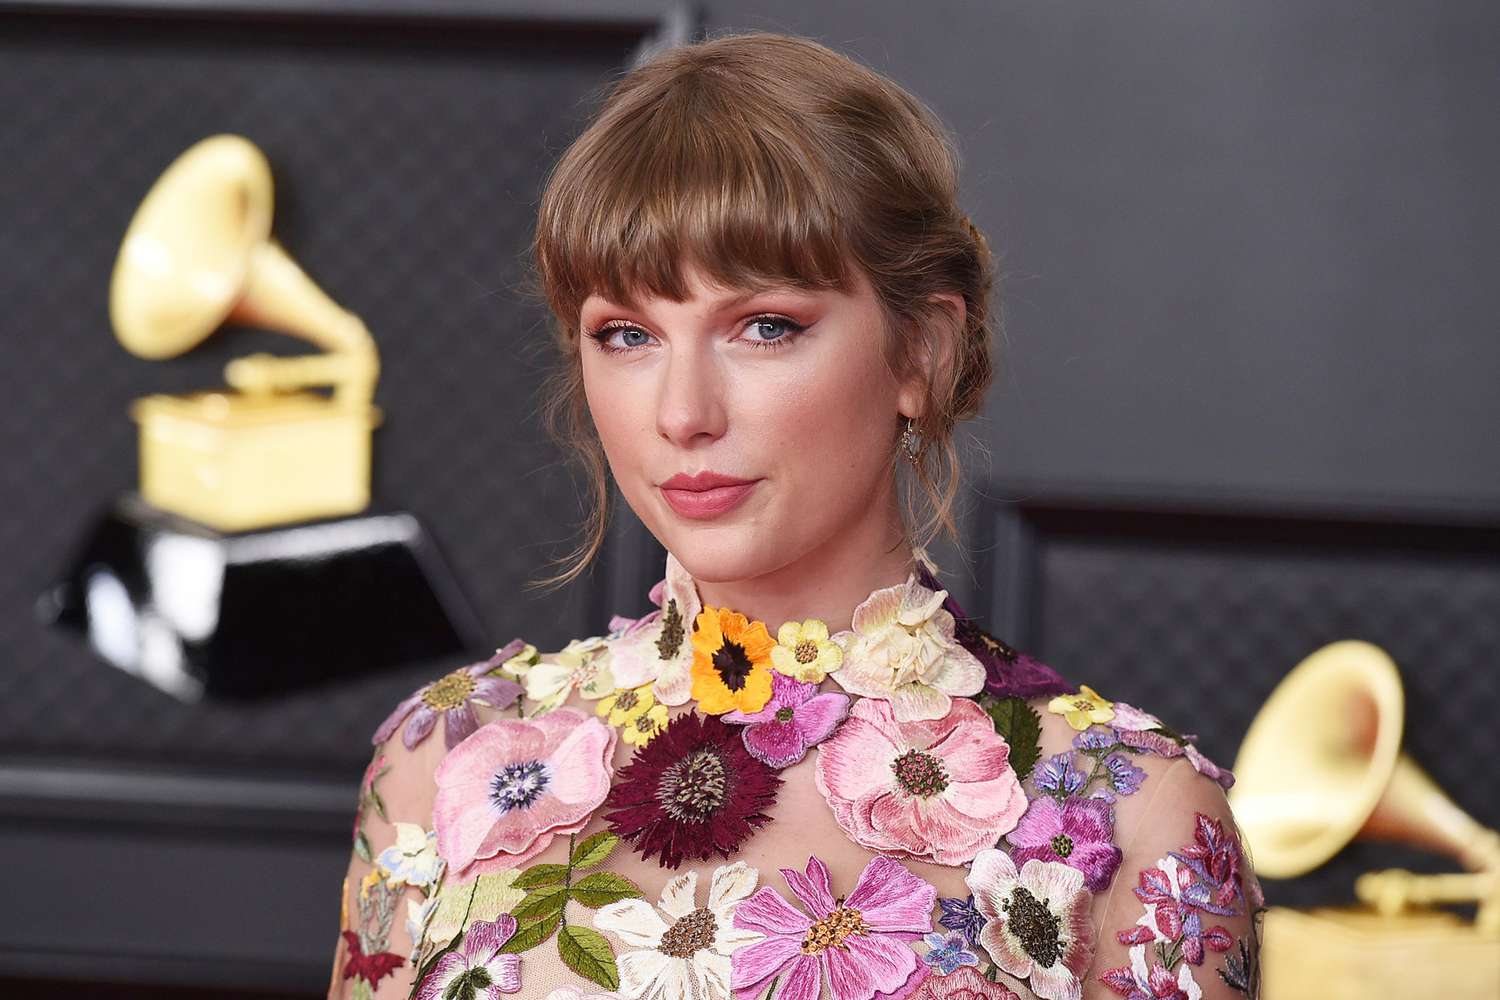 Taylor Swift Teases 'Red Season' Ahead of Album Re-Release Next Month: 'It's Worth the Wait'